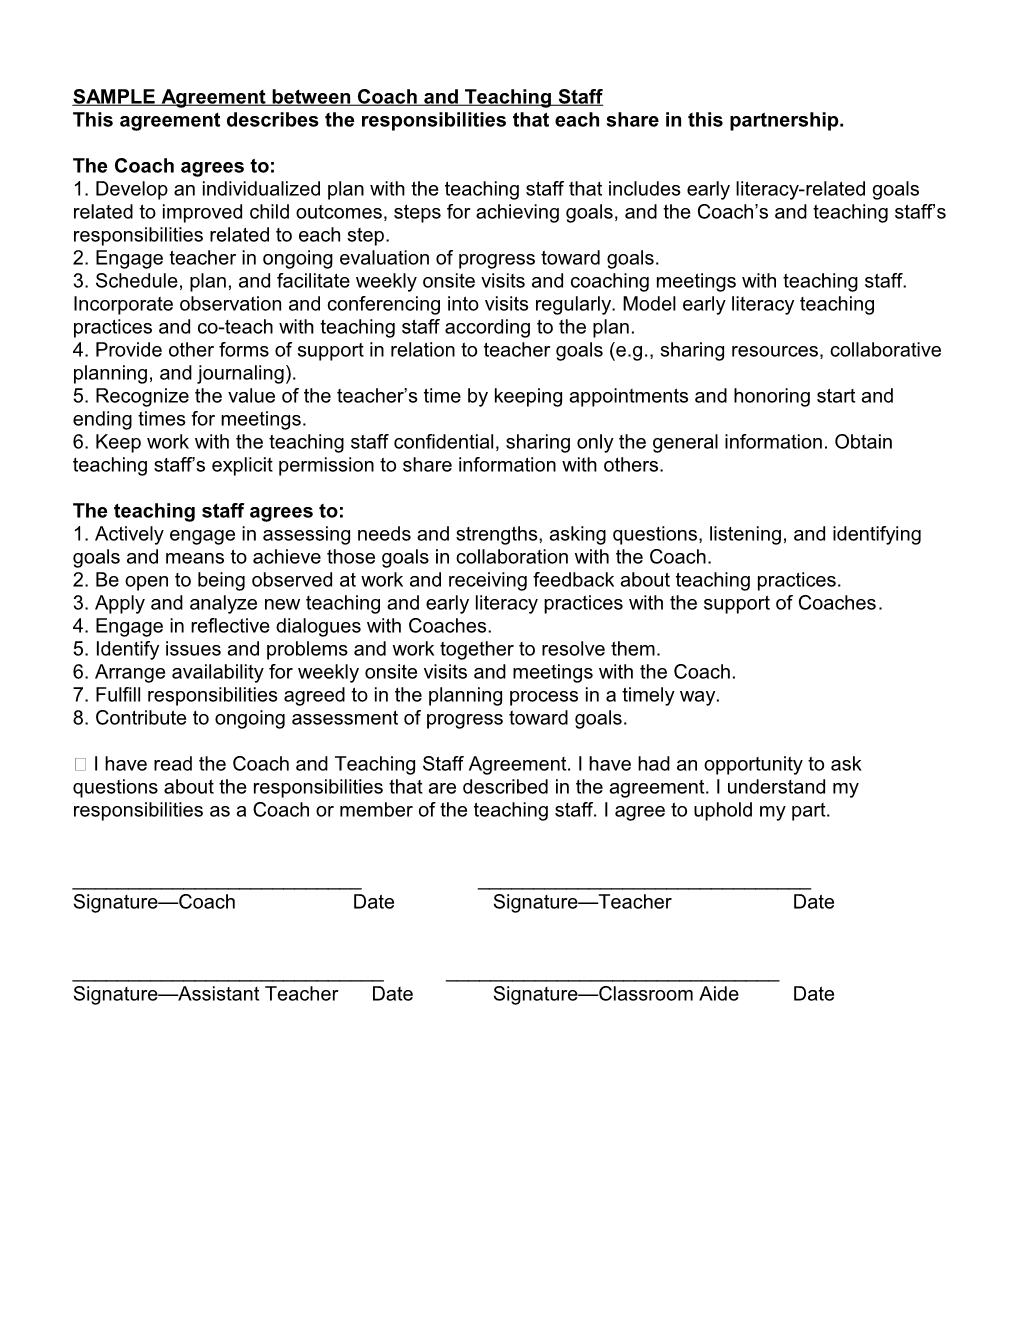 SAMPLE Agreement Between Coach and Teaching Staff